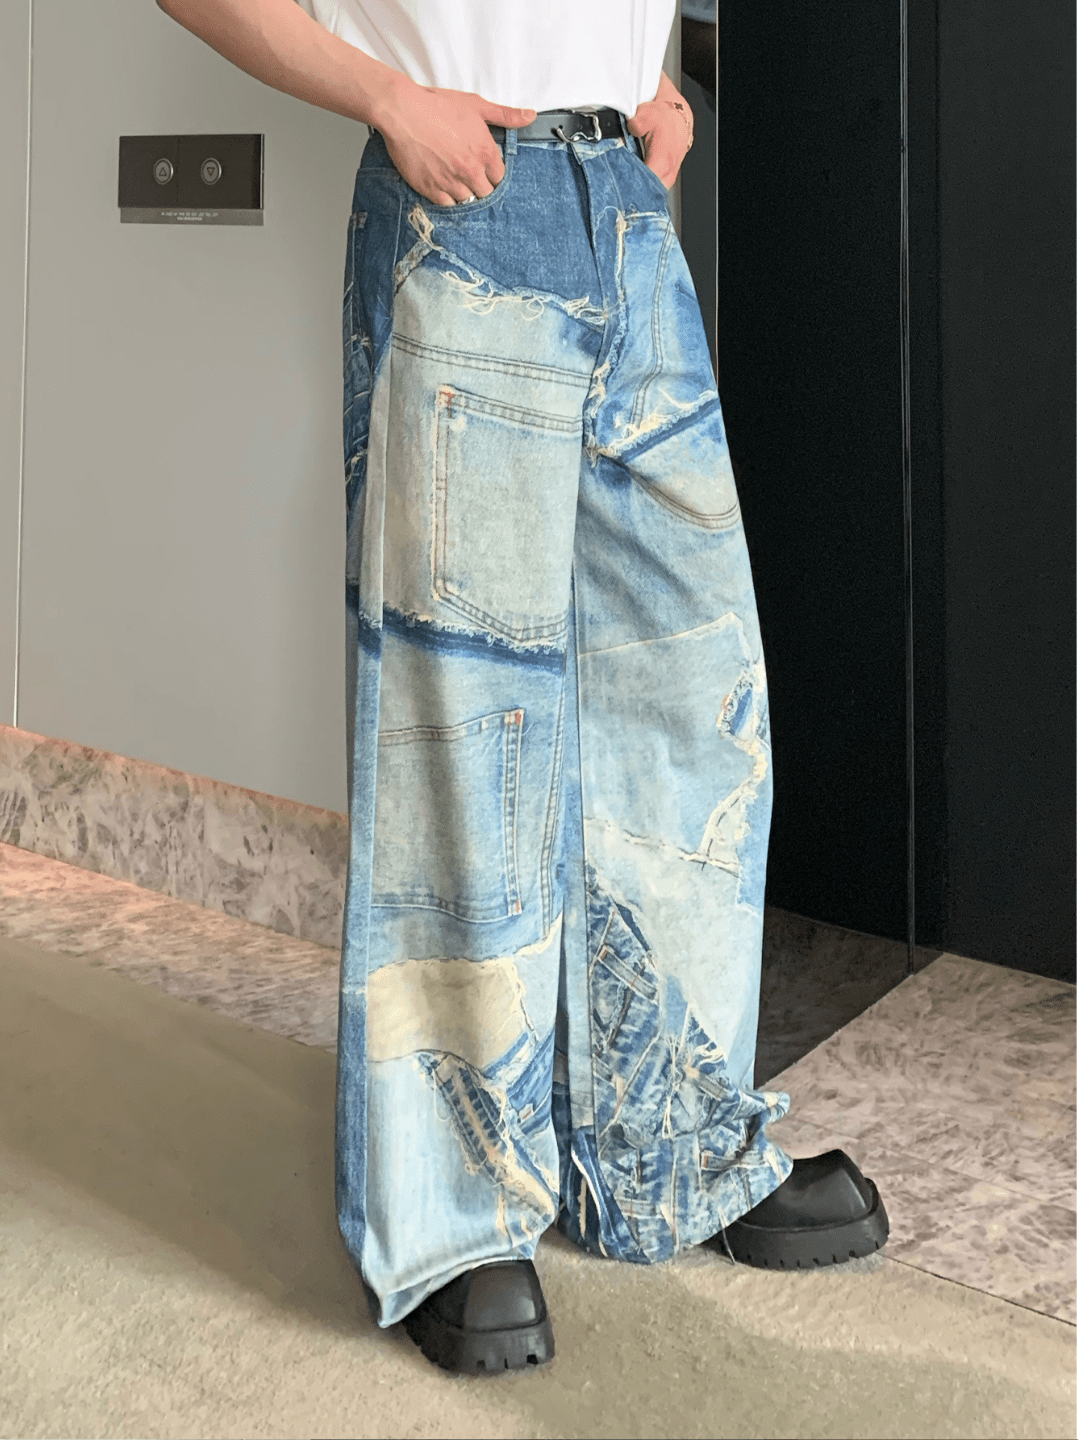 [CUIBUJU] Direct Injected Patch Jeans na1174